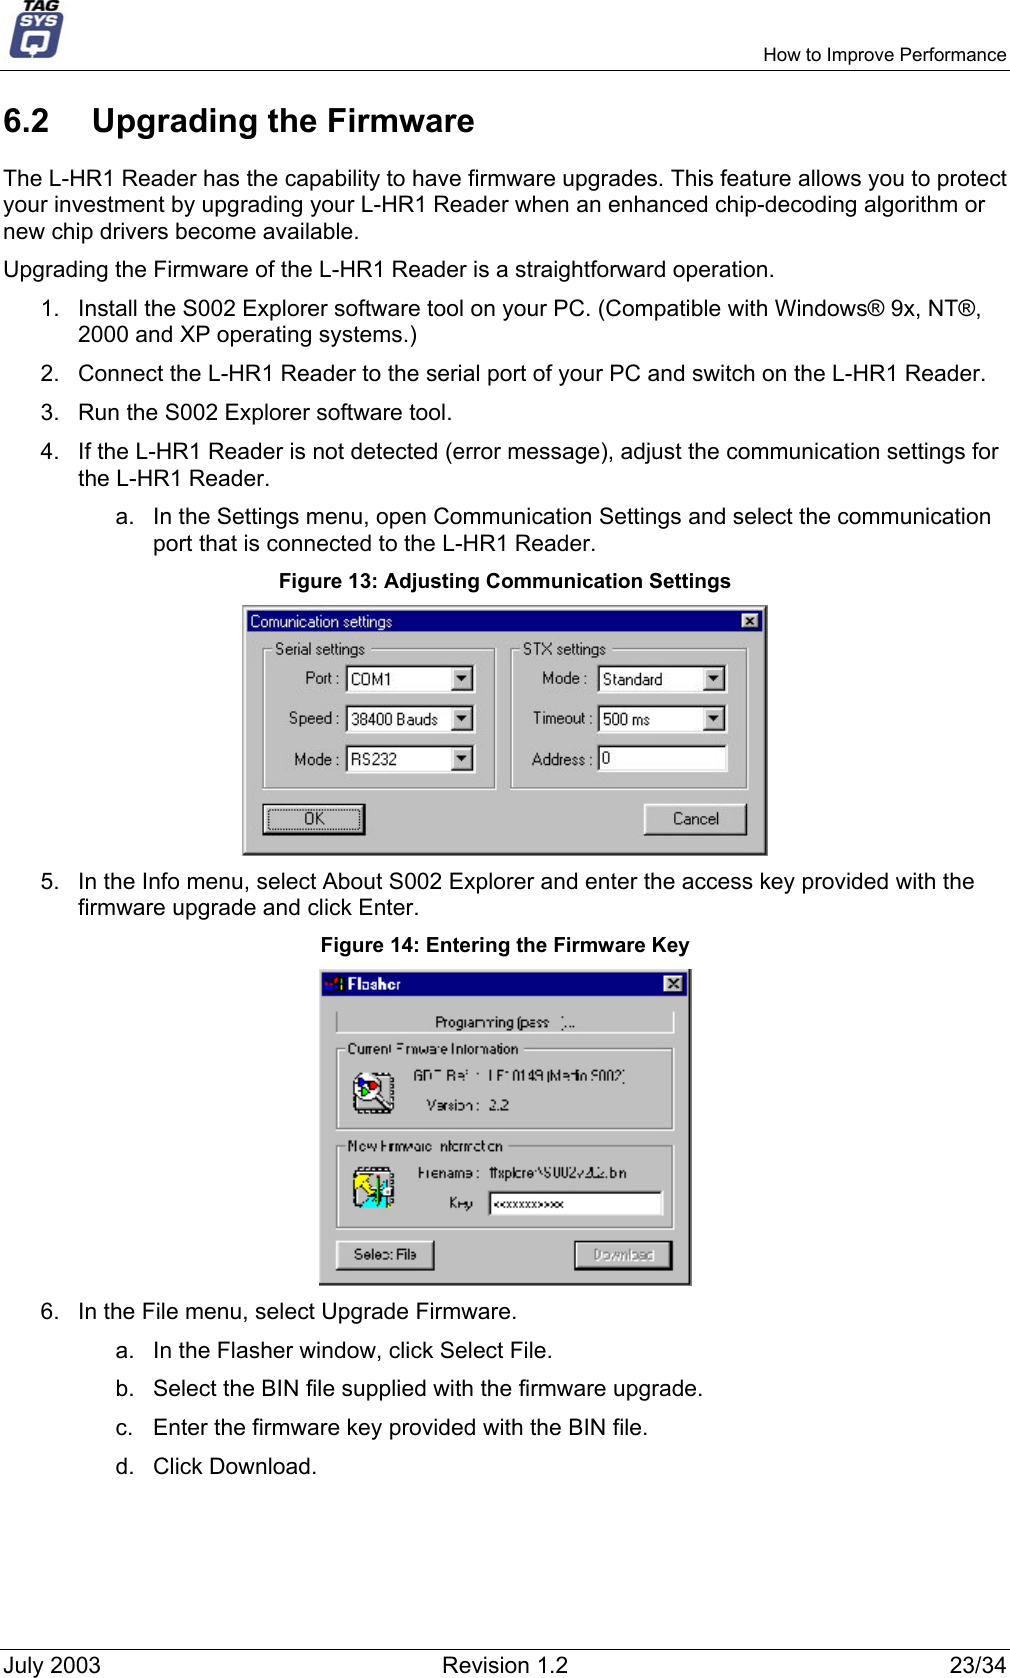     How to Improve Performance 6.2  Upgrading the Firmware The L-HR1 Reader has the capability to have firmware upgrades. This feature allows you to protect your investment by upgrading your L-HR1 Reader when an enhanced chip-decoding algorithm or new chip drivers become available. Upgrading the Firmware of the L-HR1 Reader is a straightforward operation. 1.  Install the S002 Explorer software tool on your PC. (Compatible with Windows® 9x, NT®, 2000 and XP operating systems.) 2.  Connect the L-HR1 Reader to the serial port of your PC and switch on the L-HR1 Reader. 3.  Run the S002 Explorer software tool. 4.  If the L-HR1 Reader is not detected (error message), adjust the communication settings for the L-HR1 Reader. a.  In the Settings menu, open Communication Settings and select the communication port that is connected to the L-HR1 Reader. Figure 13: Adjusting Communication Settings  5.  In the Info menu, select About S002 Explorer and enter the access key provided with the firmware upgrade and click Enter. Figure 14: Entering the Firmware Key  6.  In the File menu, select Upgrade Firmware. a.  In the Flasher window, click Select File. b.  Select the BIN file supplied with the firmware upgrade. c.  Enter the firmware key provided with the BIN file. d. Click Download. July 2003  Revision 1.2  23/34 